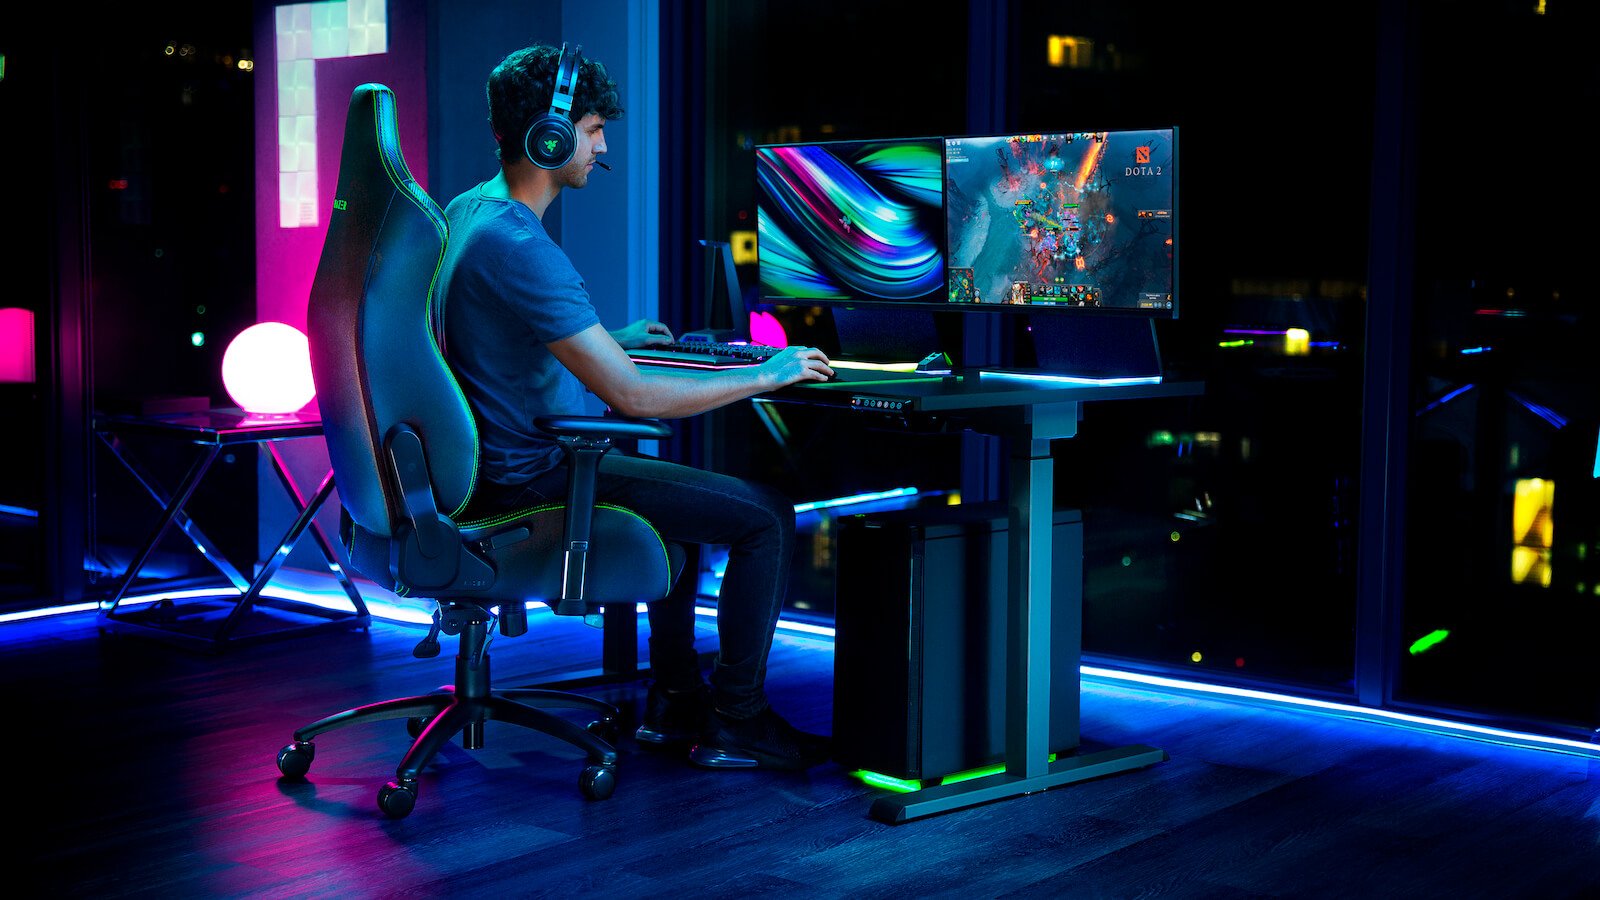 Razer Iskur lumbar-support gaming chair gives you posture-perfect gaming